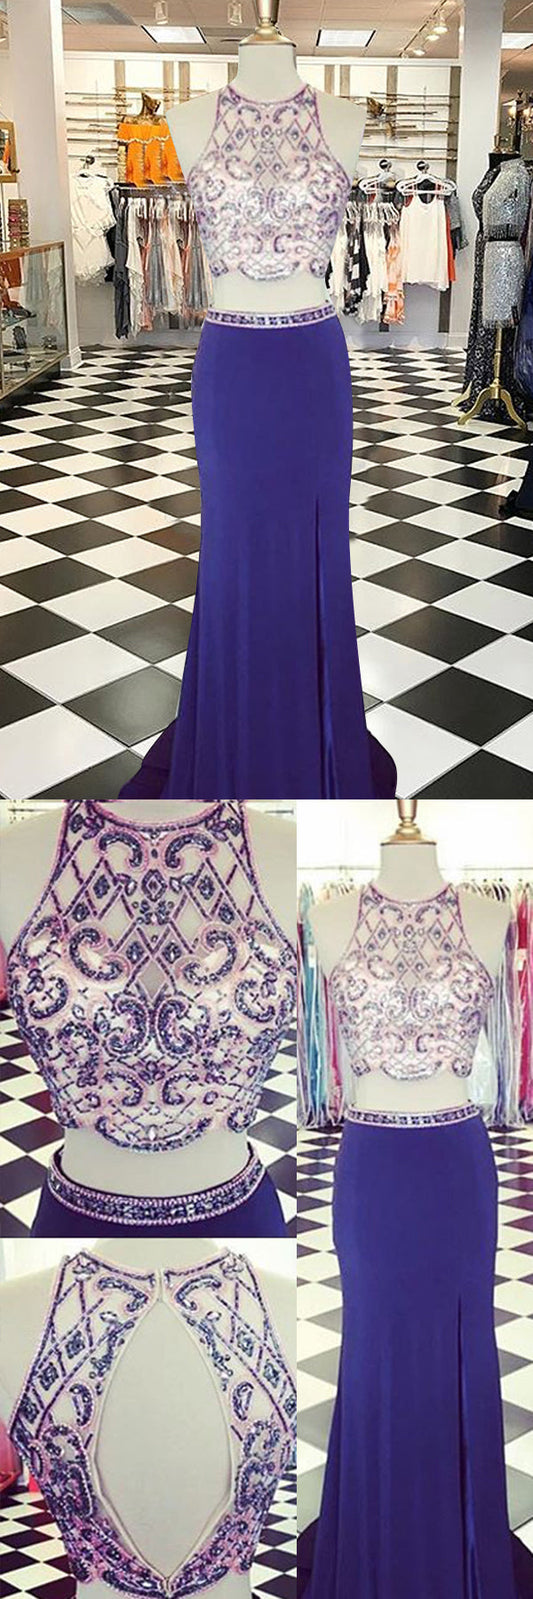 2 Pieces Prom Dresses,Mermaid Prom Dresses,Front Split Prom Gowns,Modest Prom Gowns,Prom Dresses,Prom Dresses For Teens